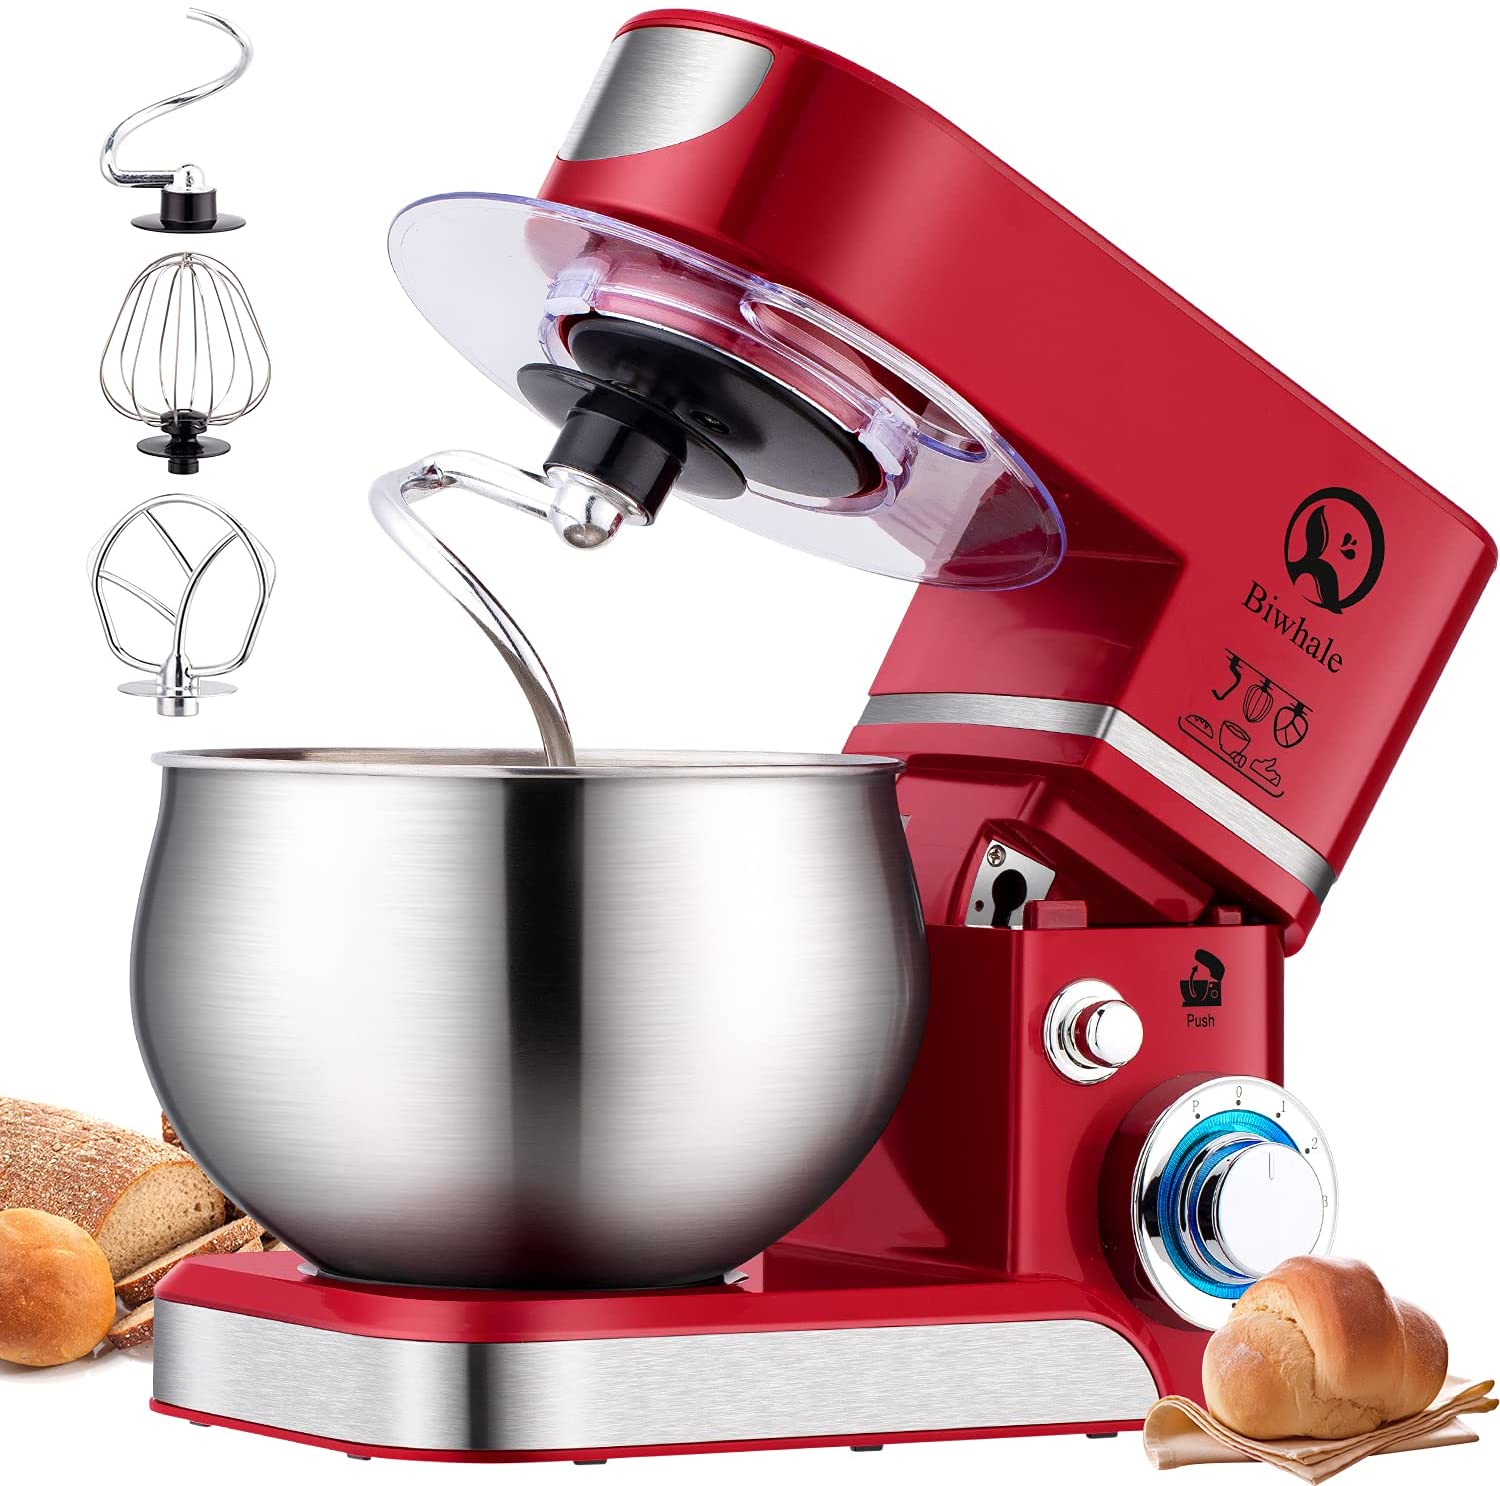 BIWHALE Food Processor Kneading Machine 6L, 1000W Reduced Noise Kneading Machine with Whisk, Dough Hook, Whisk, Splash Guard, 6+P Speed with Stainless Steel Bowl Dough Machine (Red)